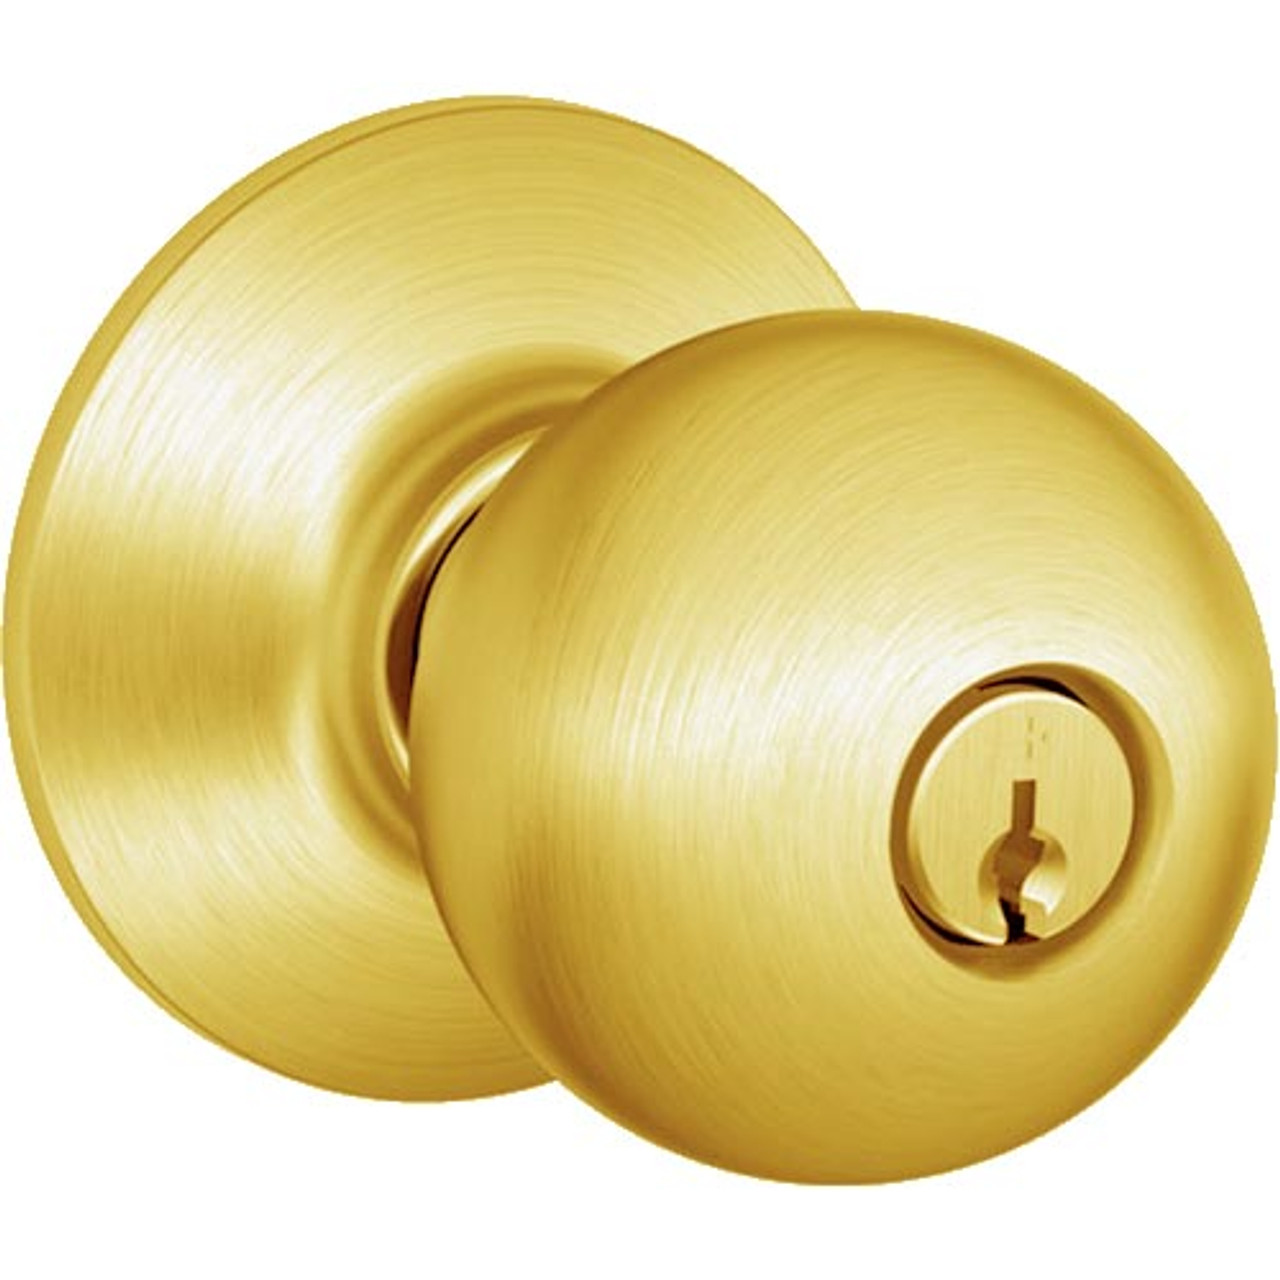 A70PD-ORB-606 Schlage Orbit Commercial Cylindrical Lock in Satin Brass